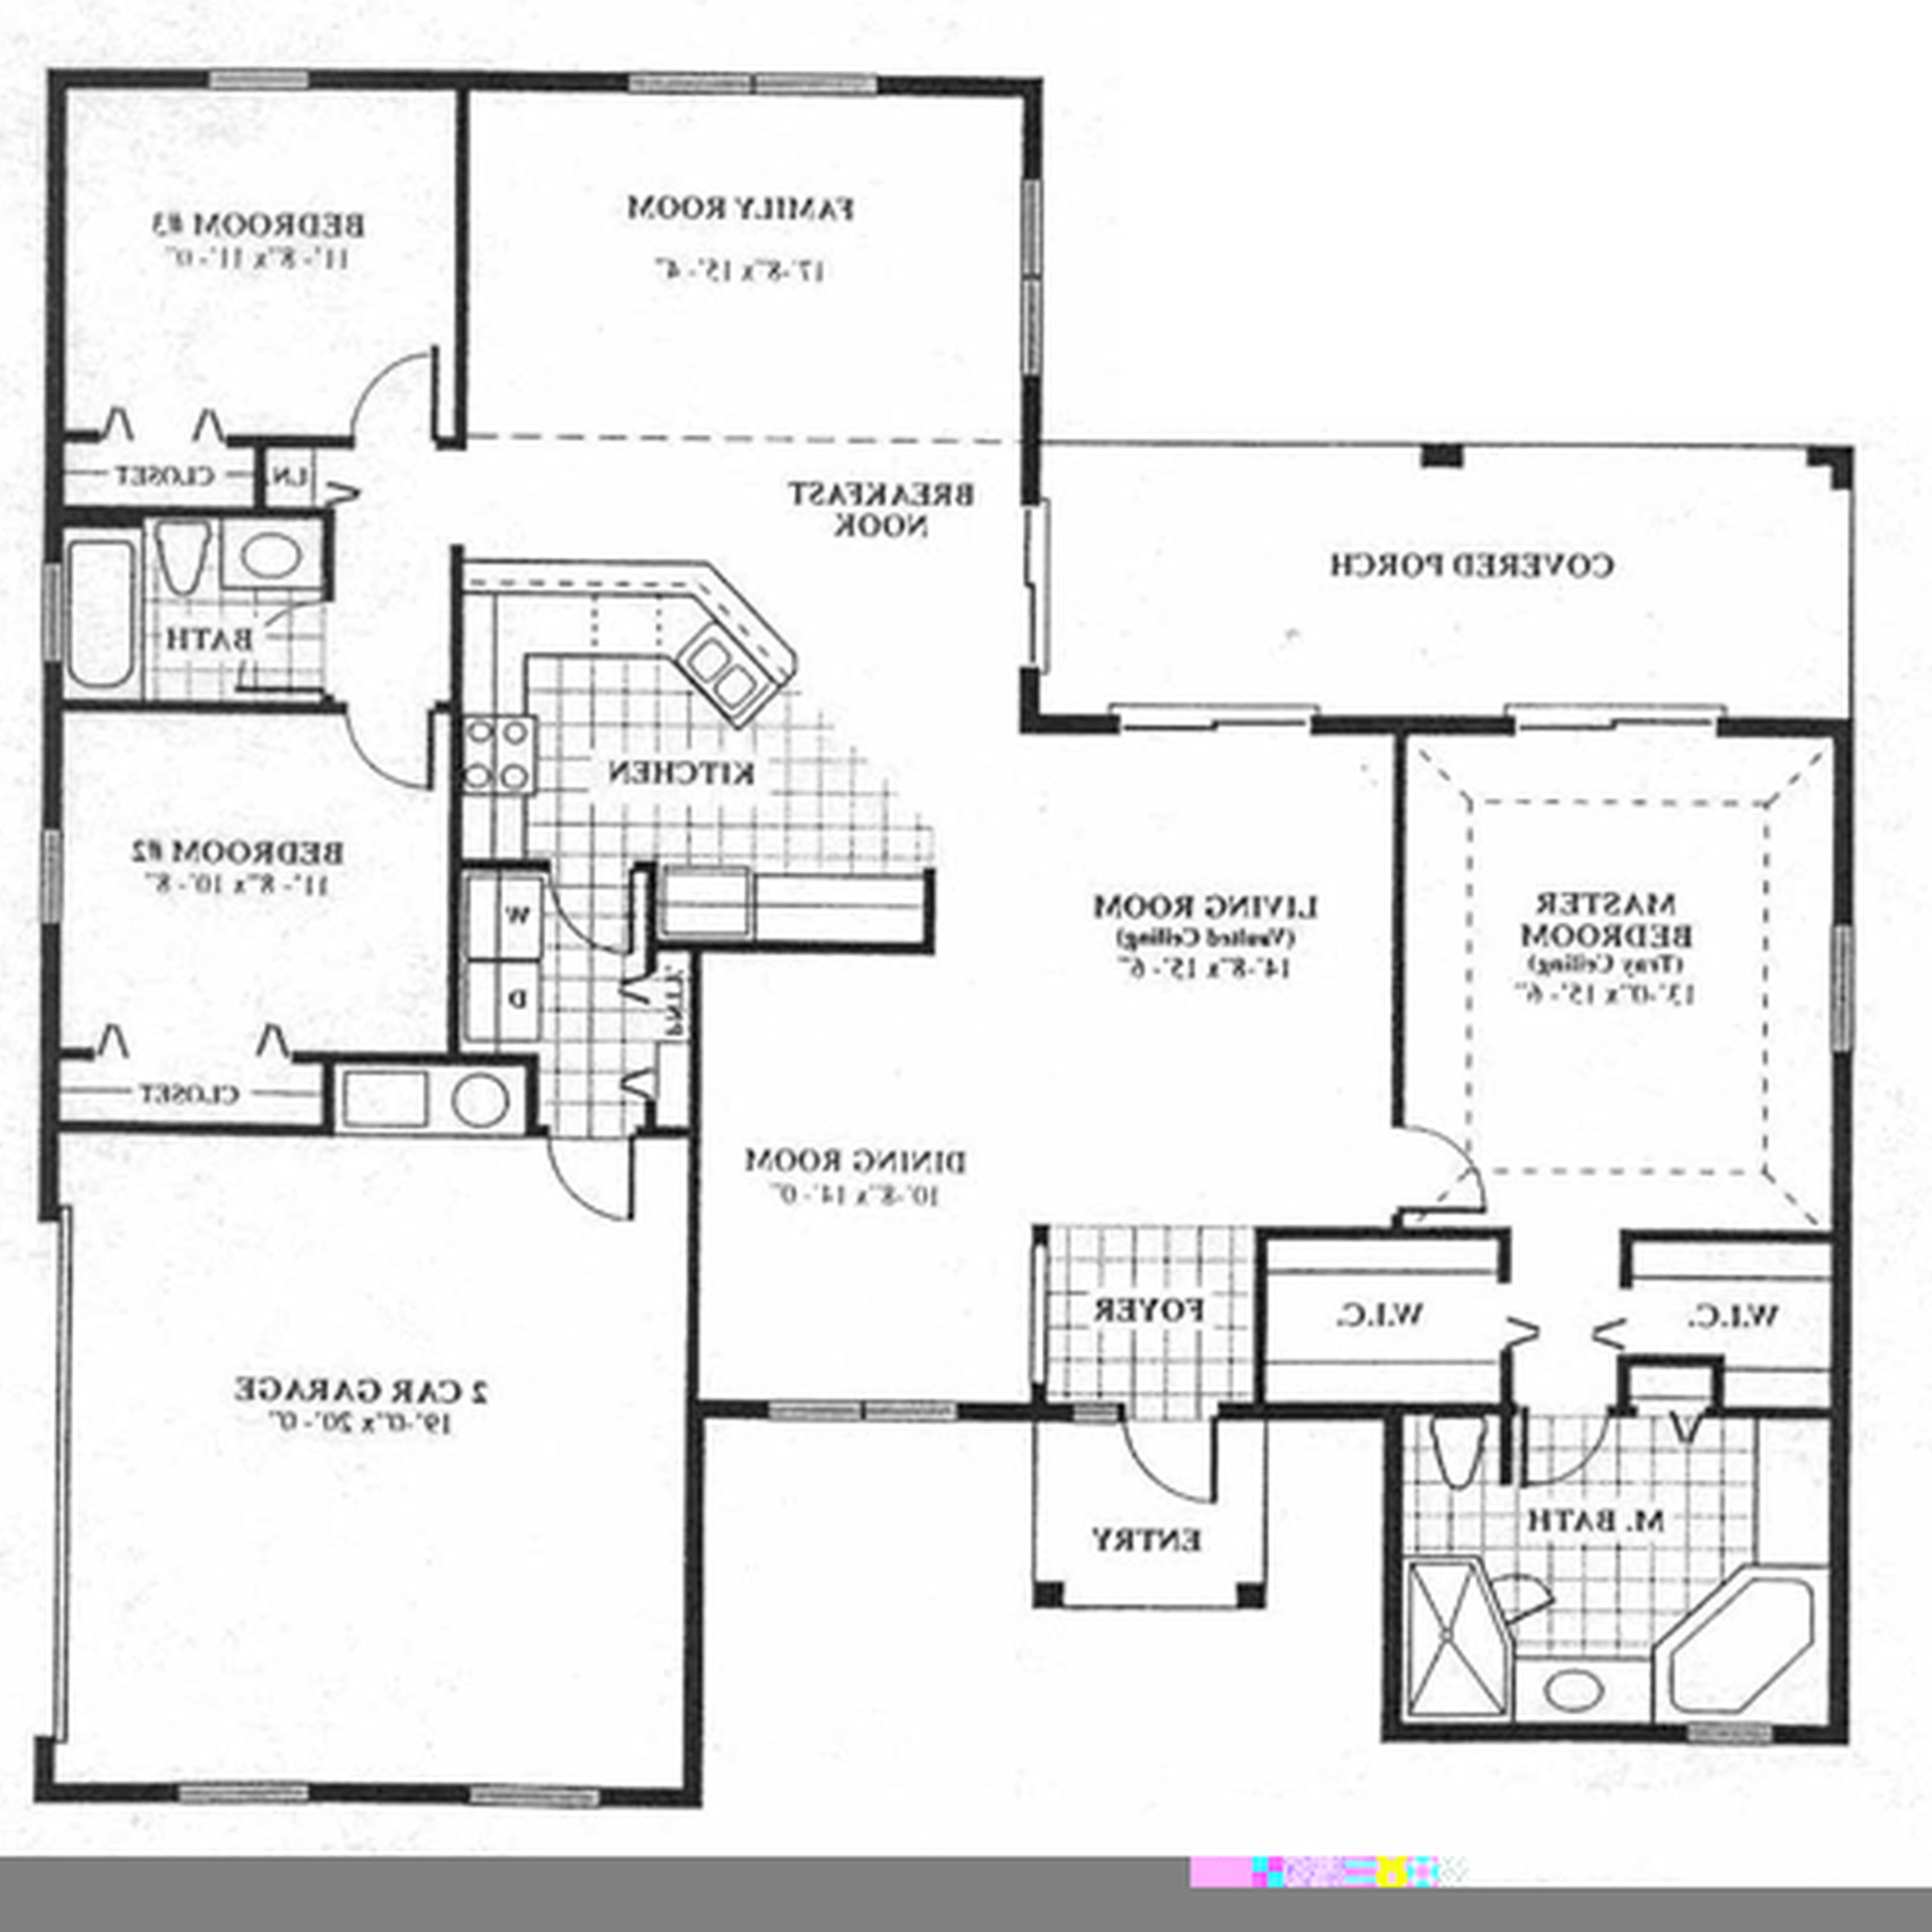 Create Floor Plans And Home Design